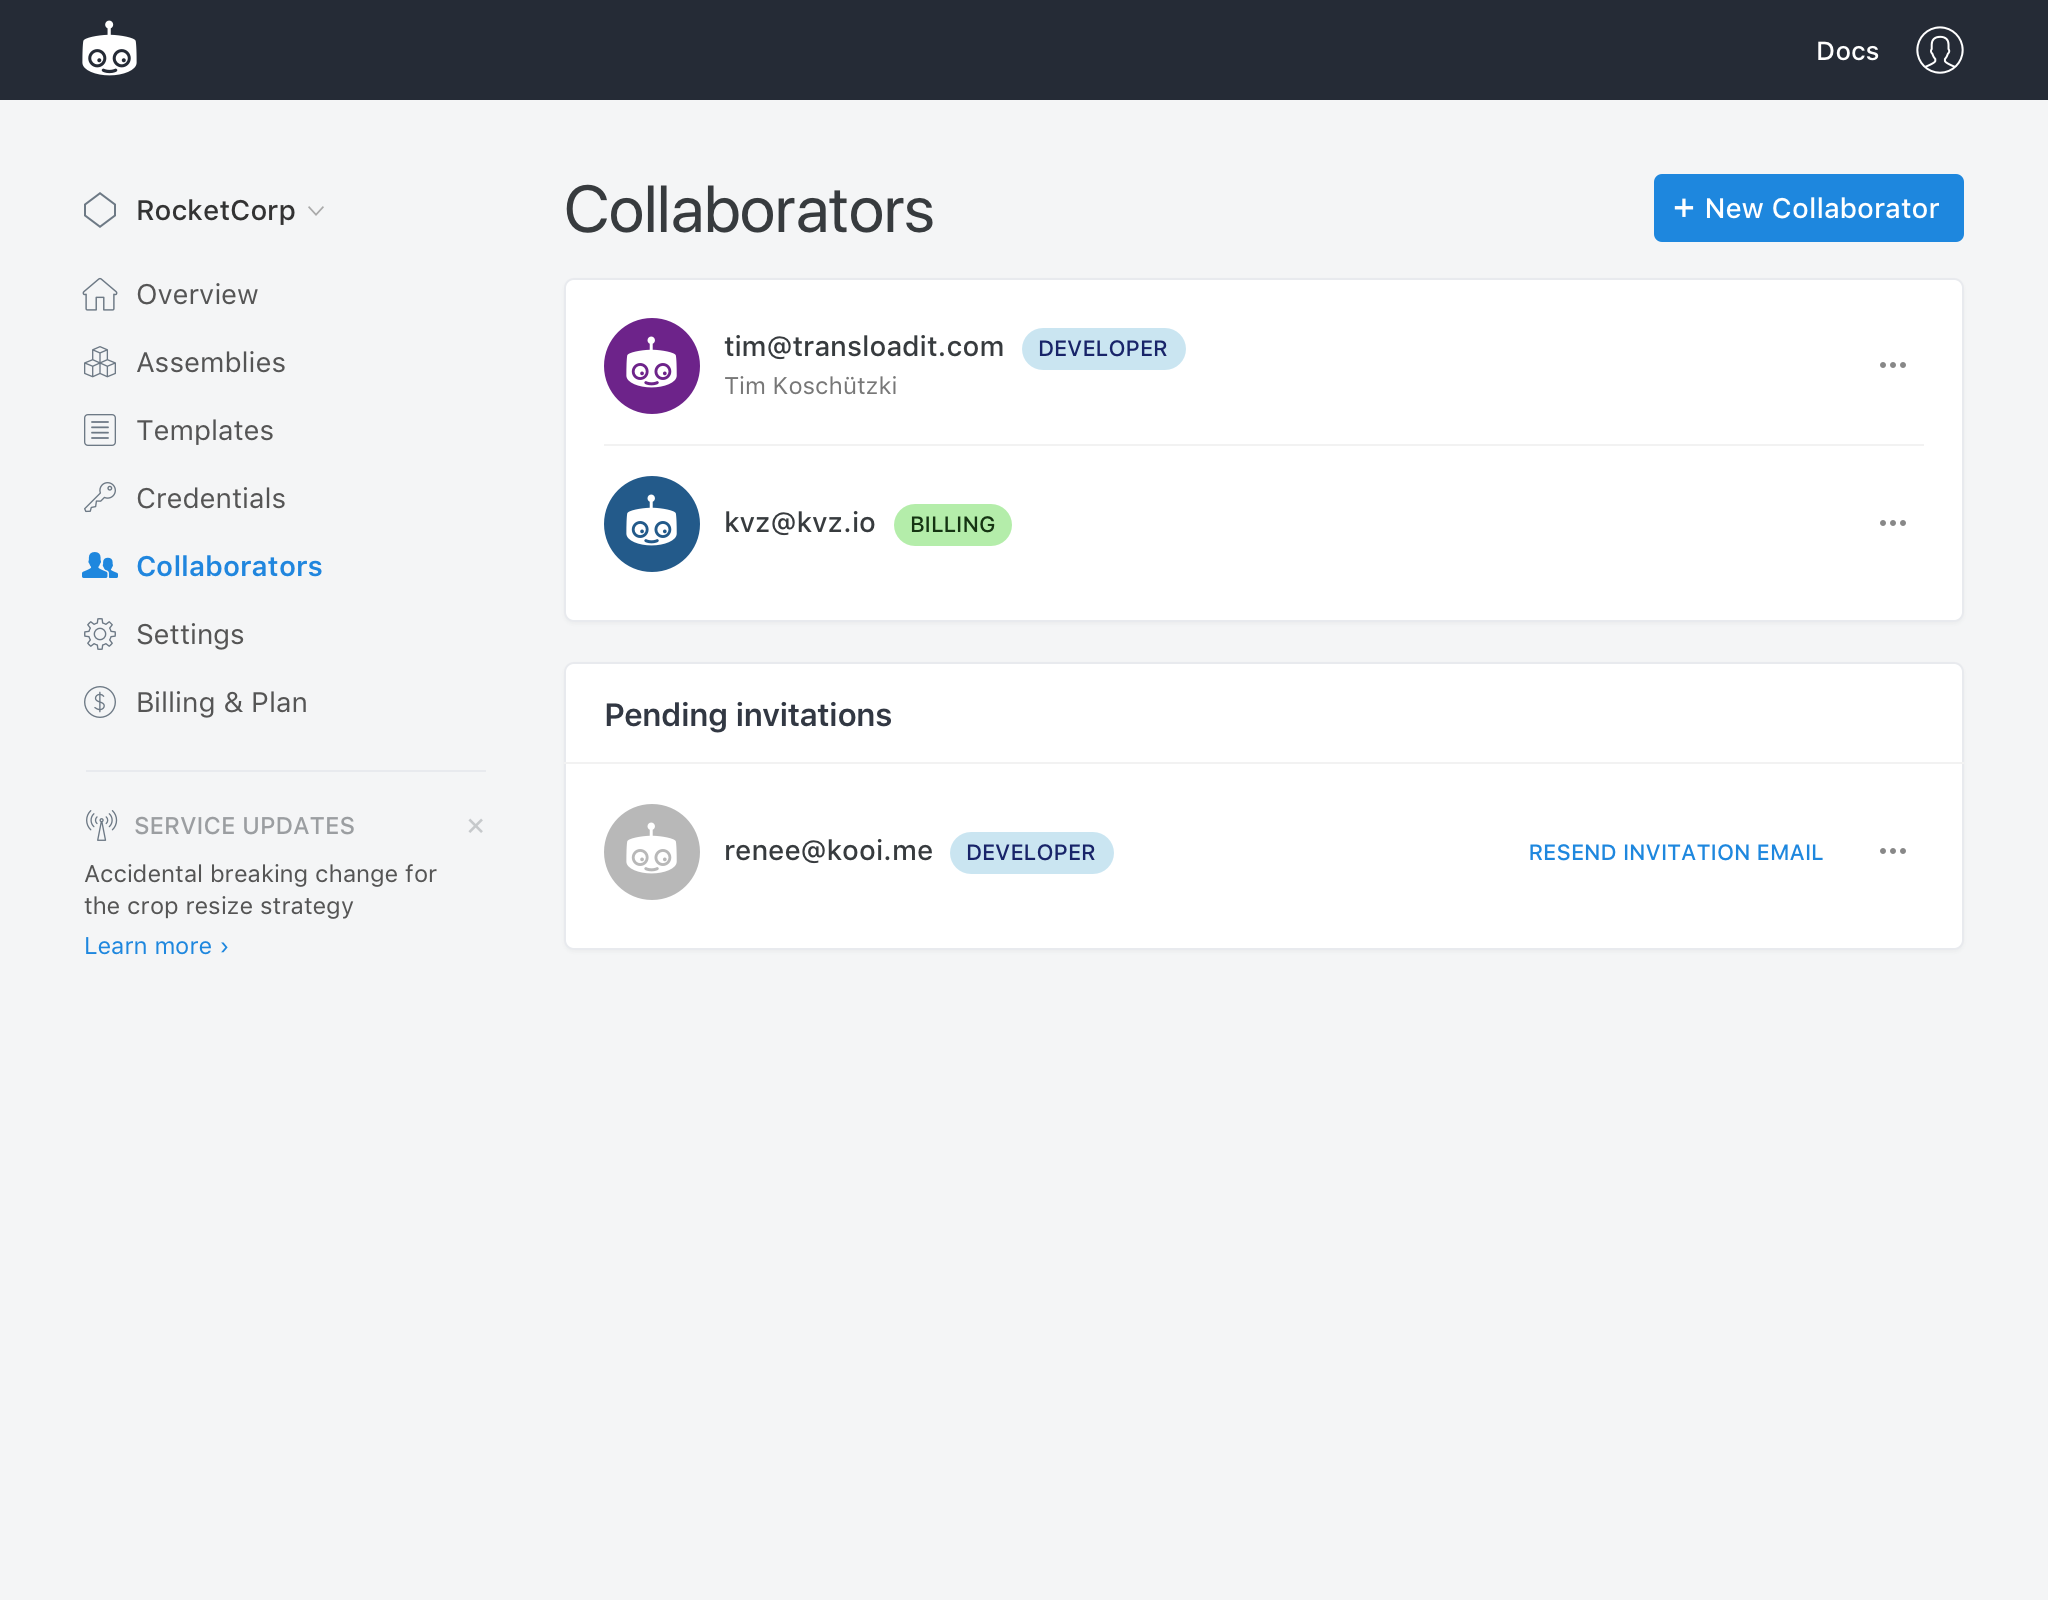 The new Collaborator feature